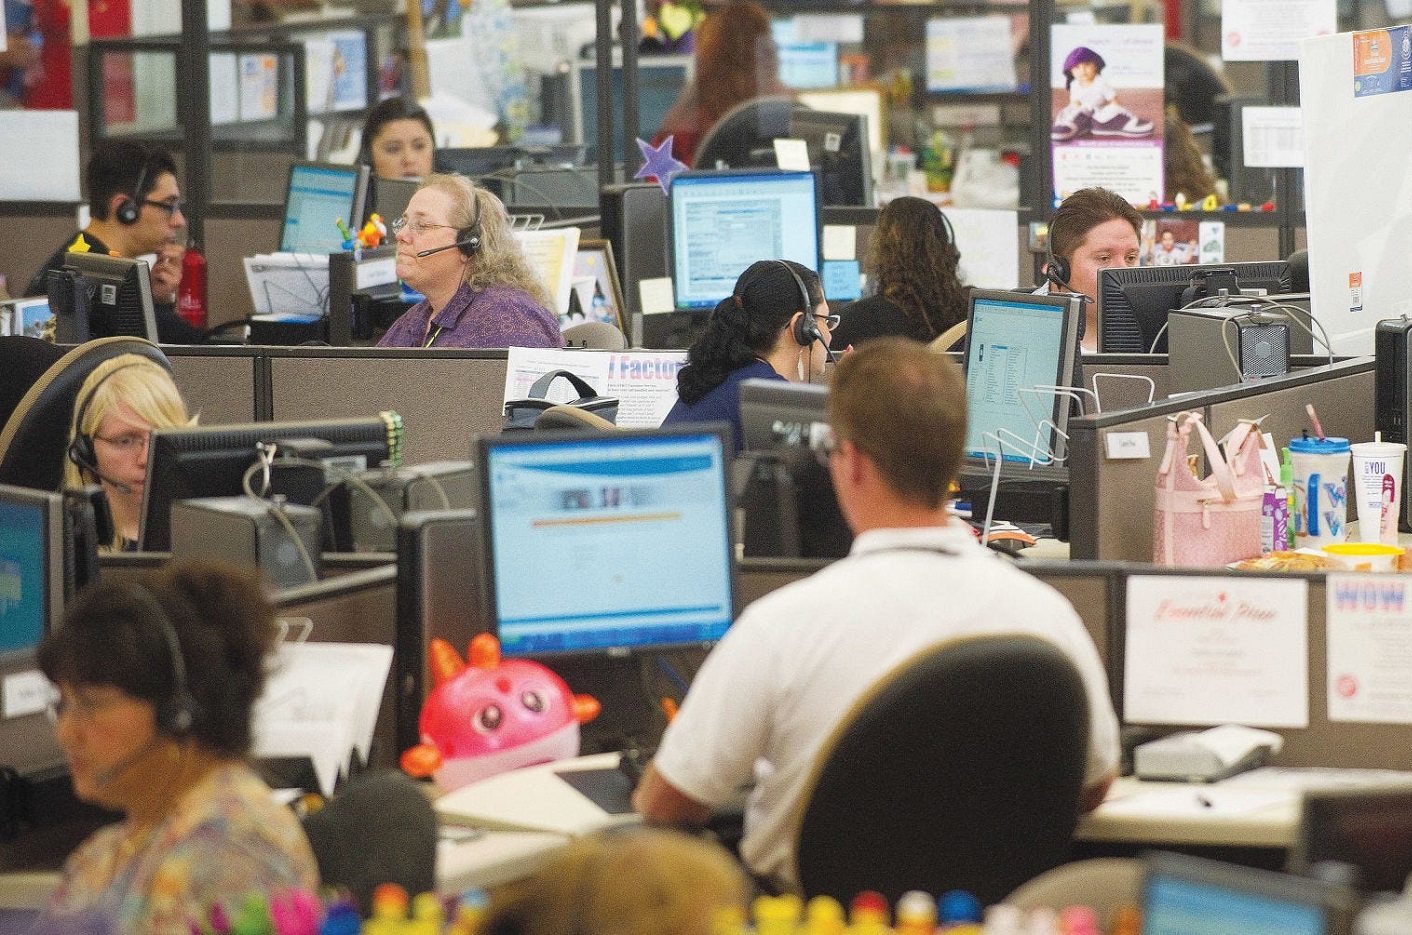 Strategies for Improving Your Contact Center Environment and Culture